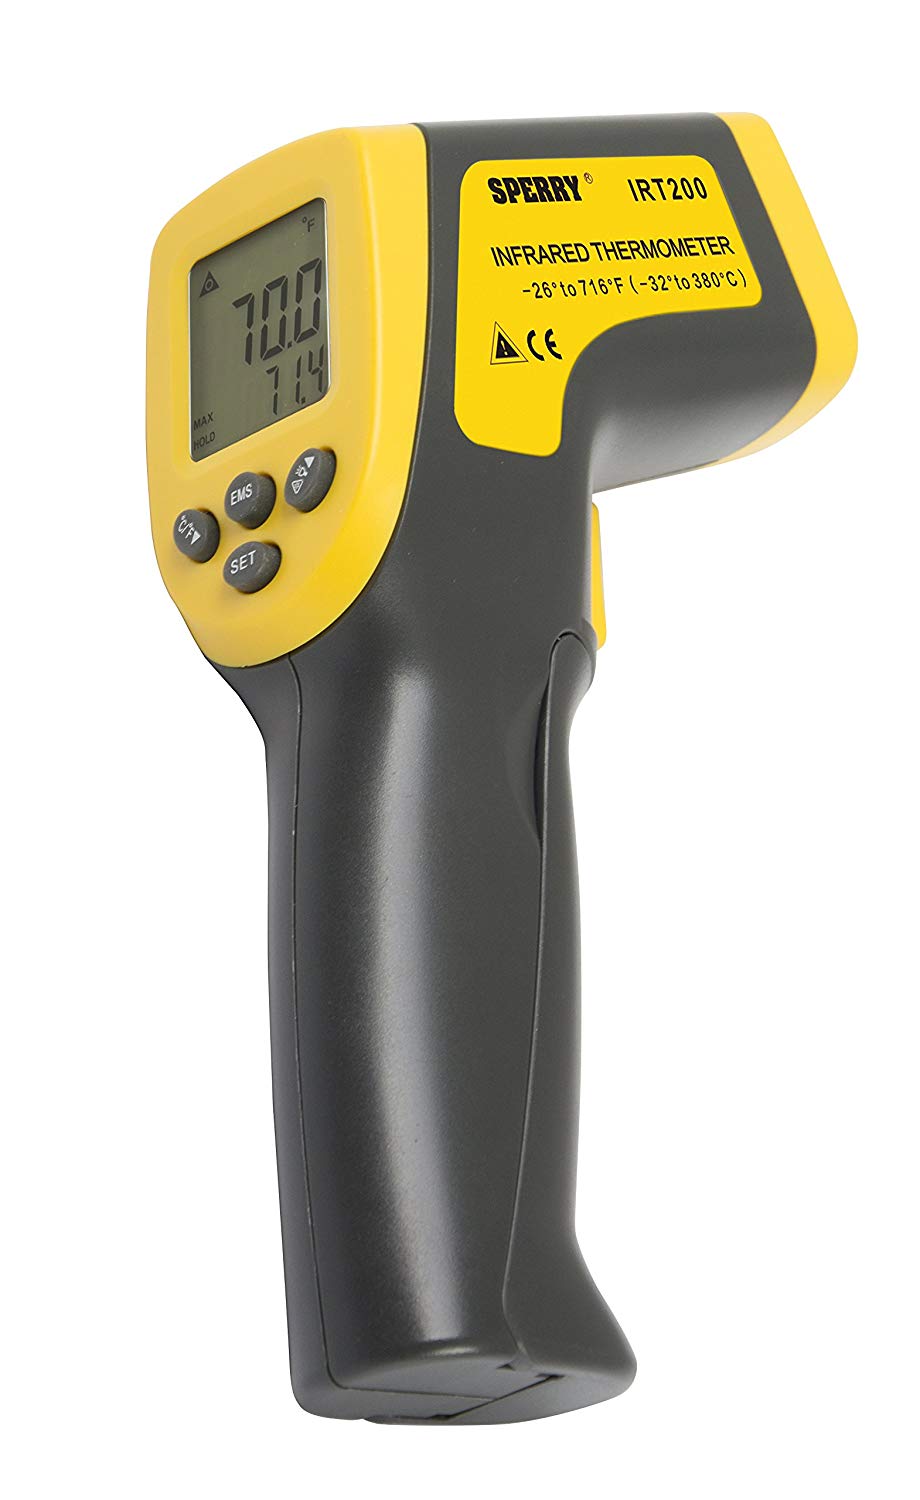 Sperry IRT200 Temperature Check Gun Style Infrared Thermometer